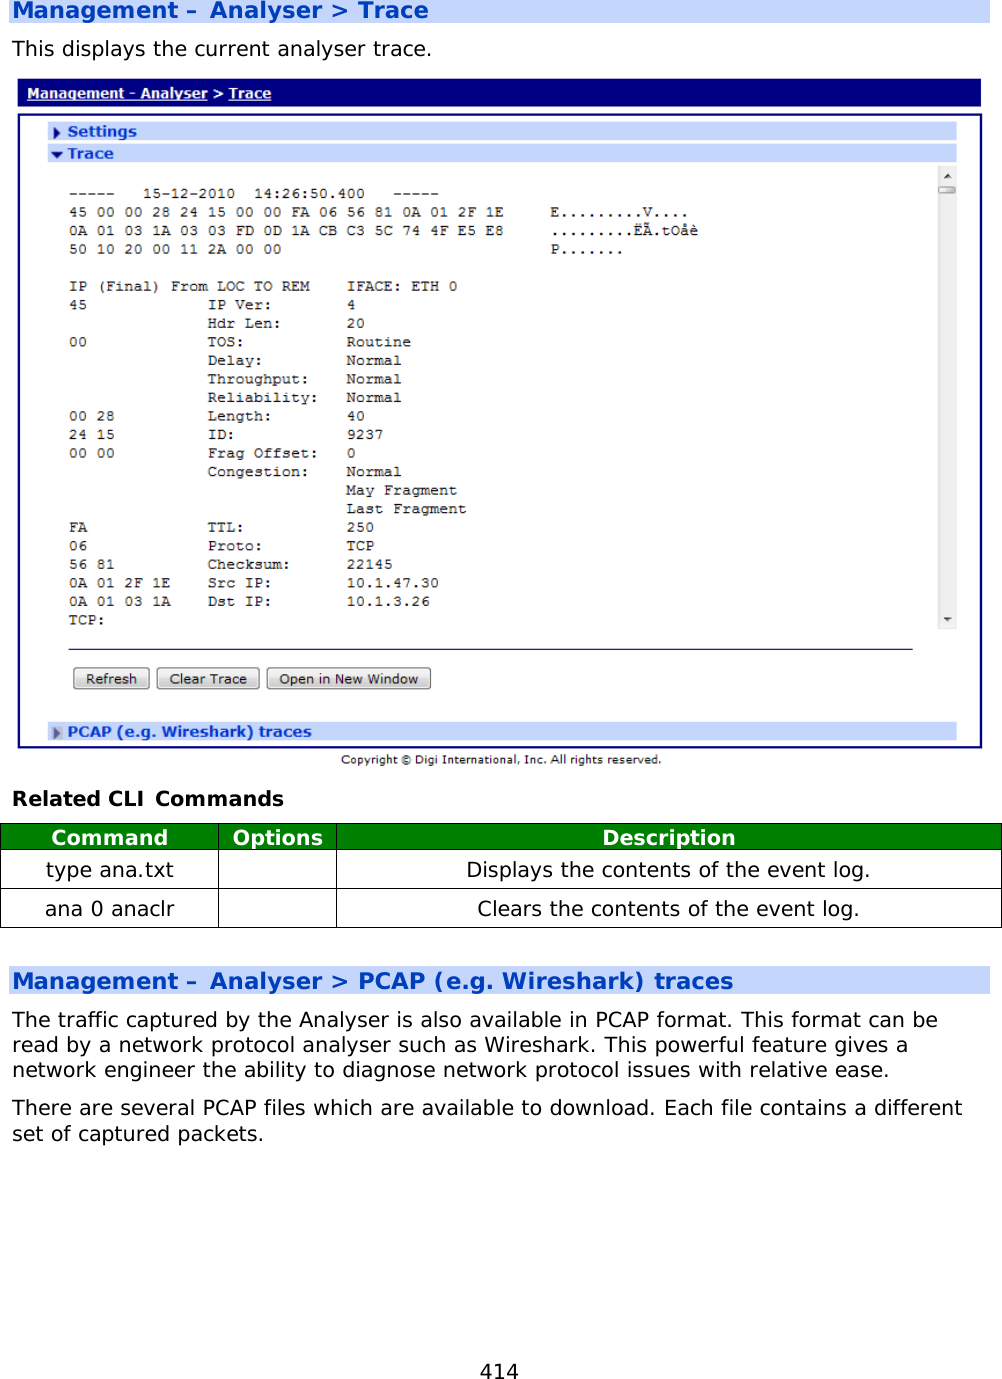 414  Management – Analyser &gt; Trace This displays the current analyser trace.  Related CLI Commands Command Options Description type ana.txt    Displays the contents of the event log. ana 0 anaclr    Clears the contents of the event log.  Management – Analyser &gt; PCAP (e.g. Wireshark) traces The traffic captured by the Analyser is also available in PCAP format. This format can be read by a network protocol analyser such as Wireshark. This powerful feature gives a network engineer the ability to diagnose network protocol issues with relative ease. There are several PCAP files which are available to download. Each file contains a different set of captured packets.    